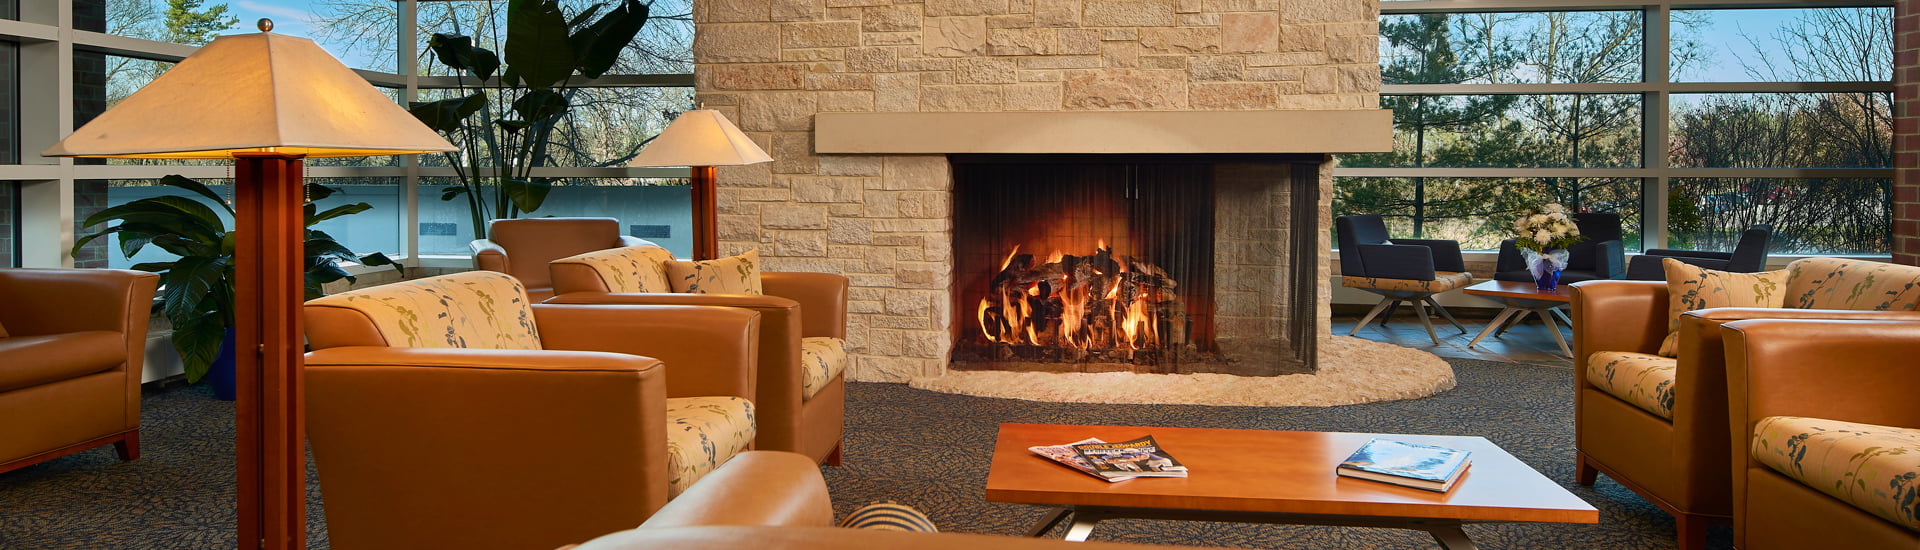 fireplace-and-seating-straight-on-hero